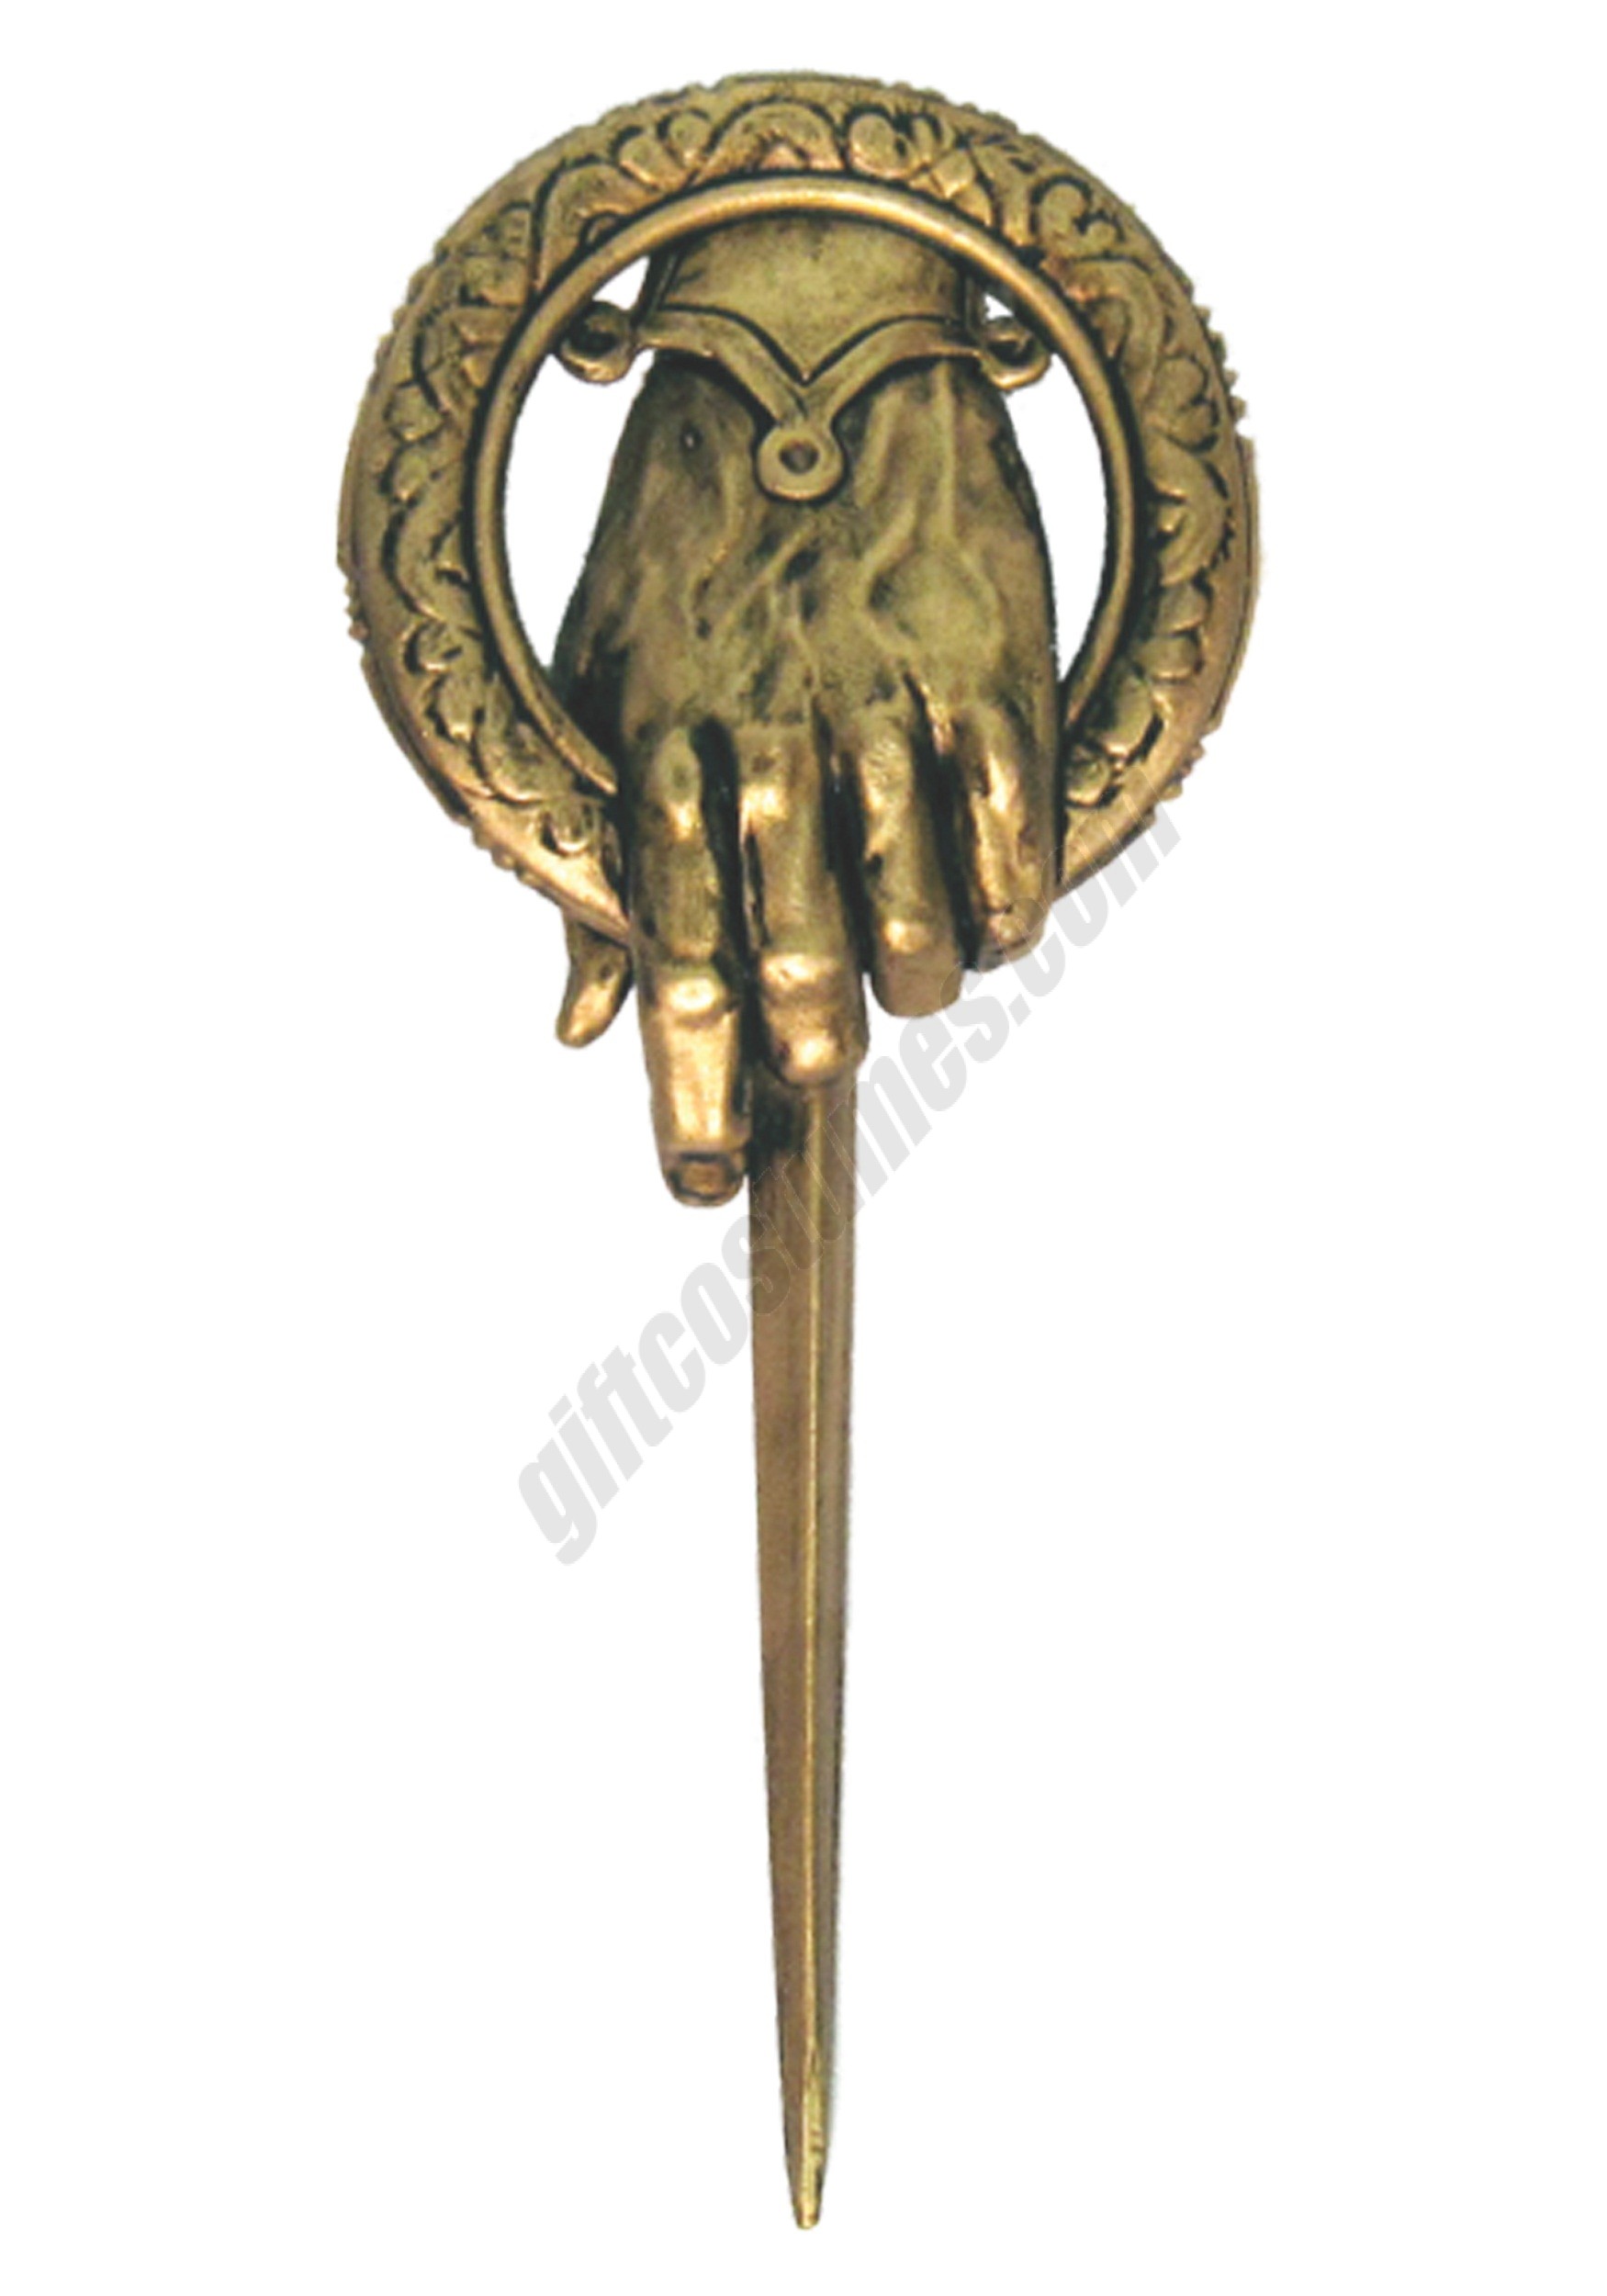 Game of Thrones Hand of the King Metal Pin Promotions - Game of Thrones Hand of the King Metal Pin Promotions